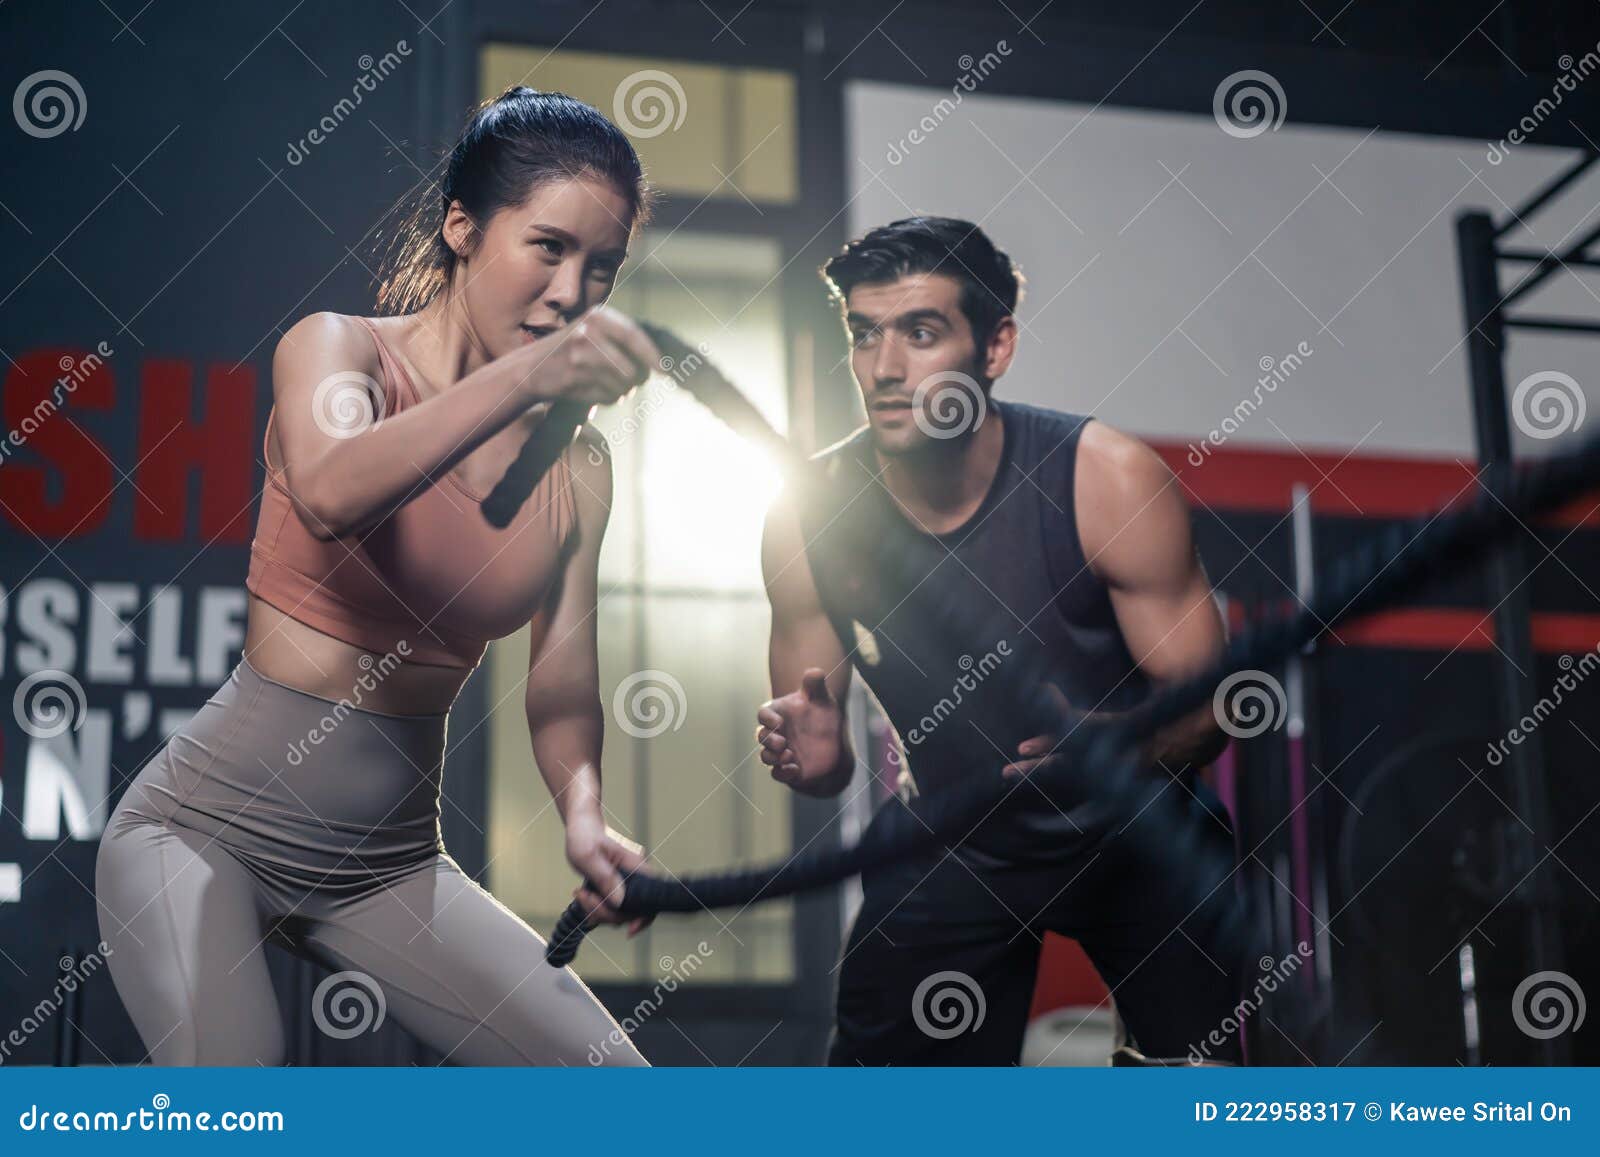 caucasian fitness trainer or instructor instruct and motivate young active beautiful sport girl using battle rope making double